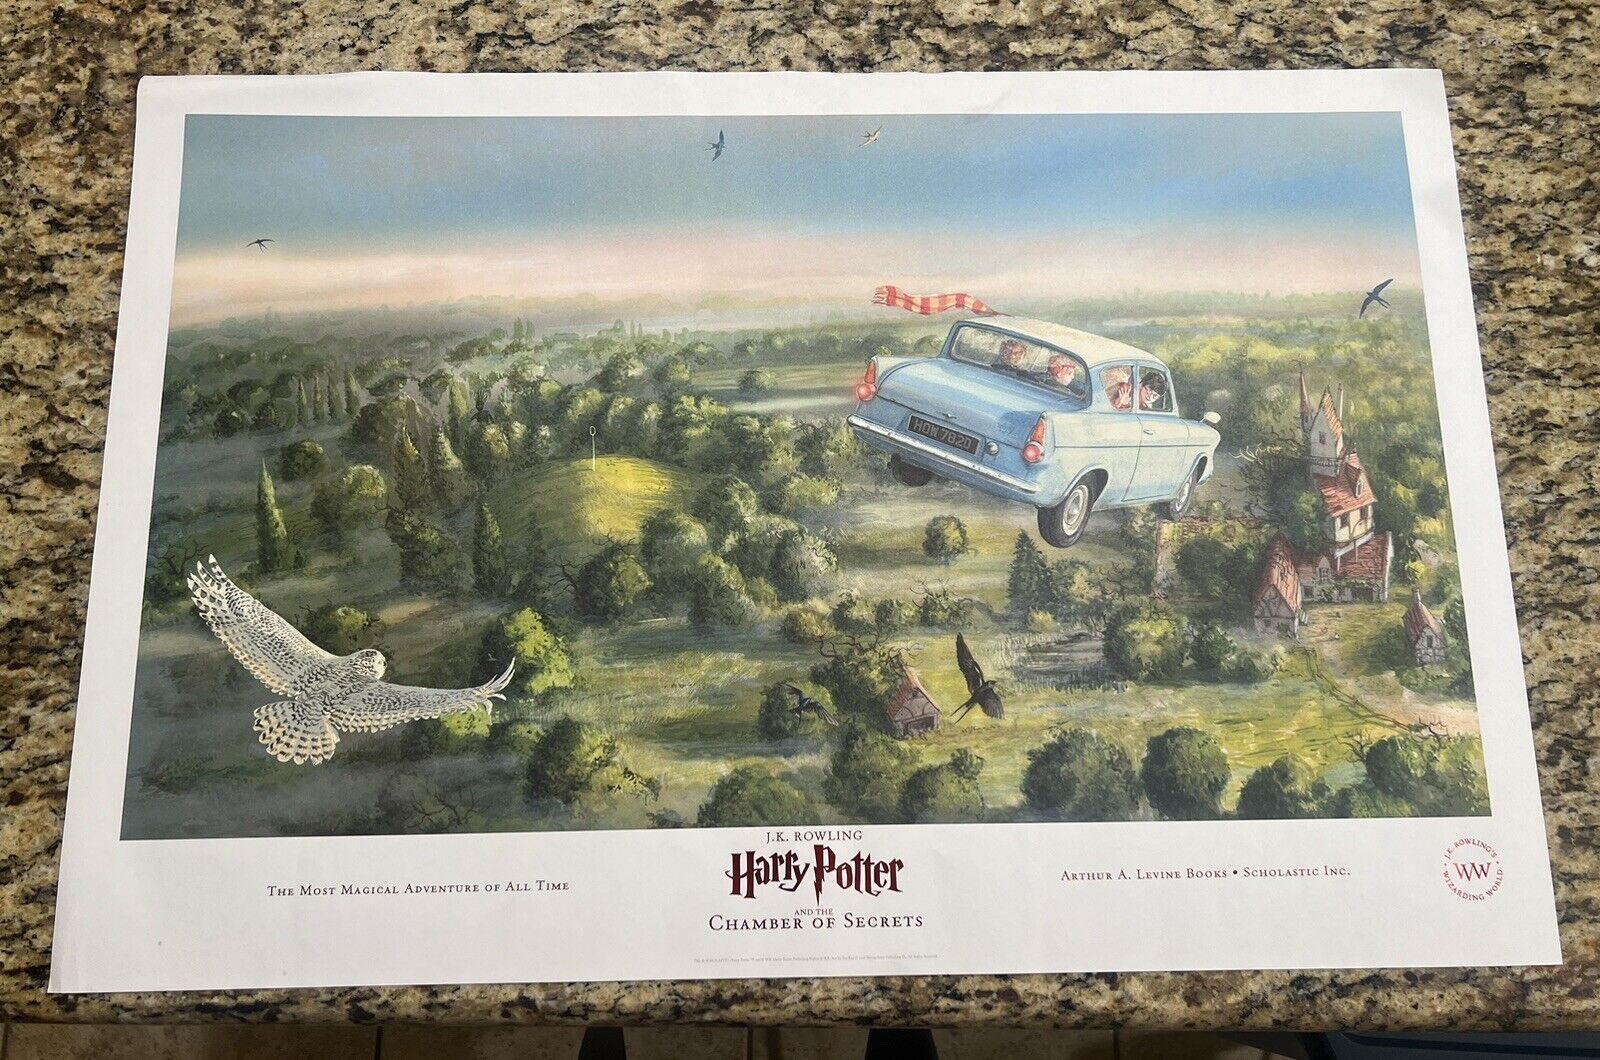 Harry Potter Chamber of Secrets Illustrated 30 x 20 Poster Print Wizarding World